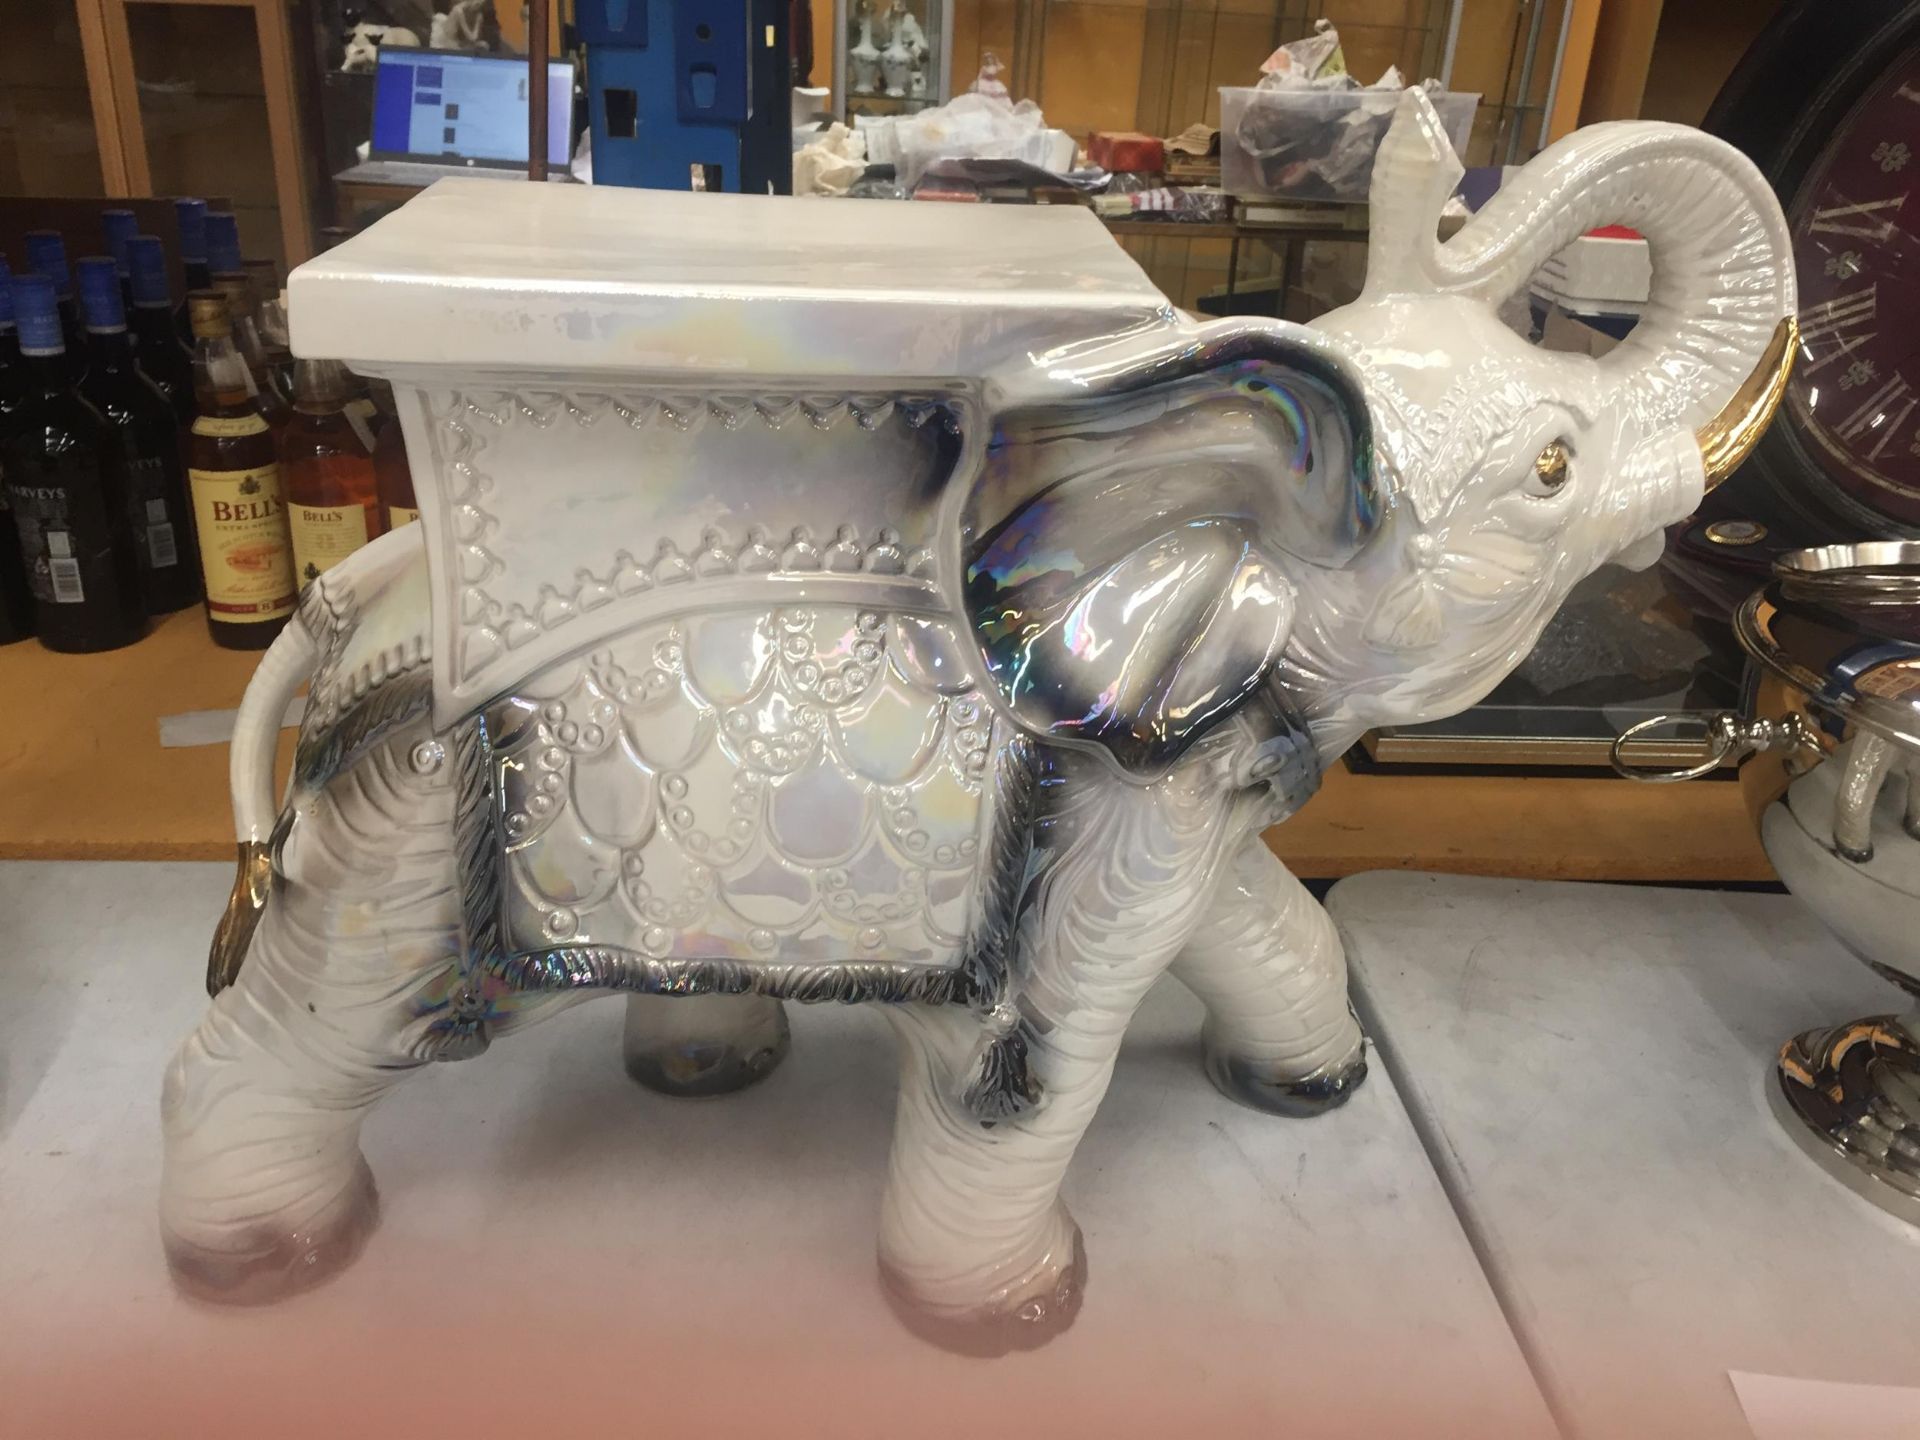 A DECORATIVE CERAMIC GARDEN ELEPHANT SEAT WITH PEARLESCENT DESIGN AND GILT HIGHLIGHTS, HEIGHT 48CM